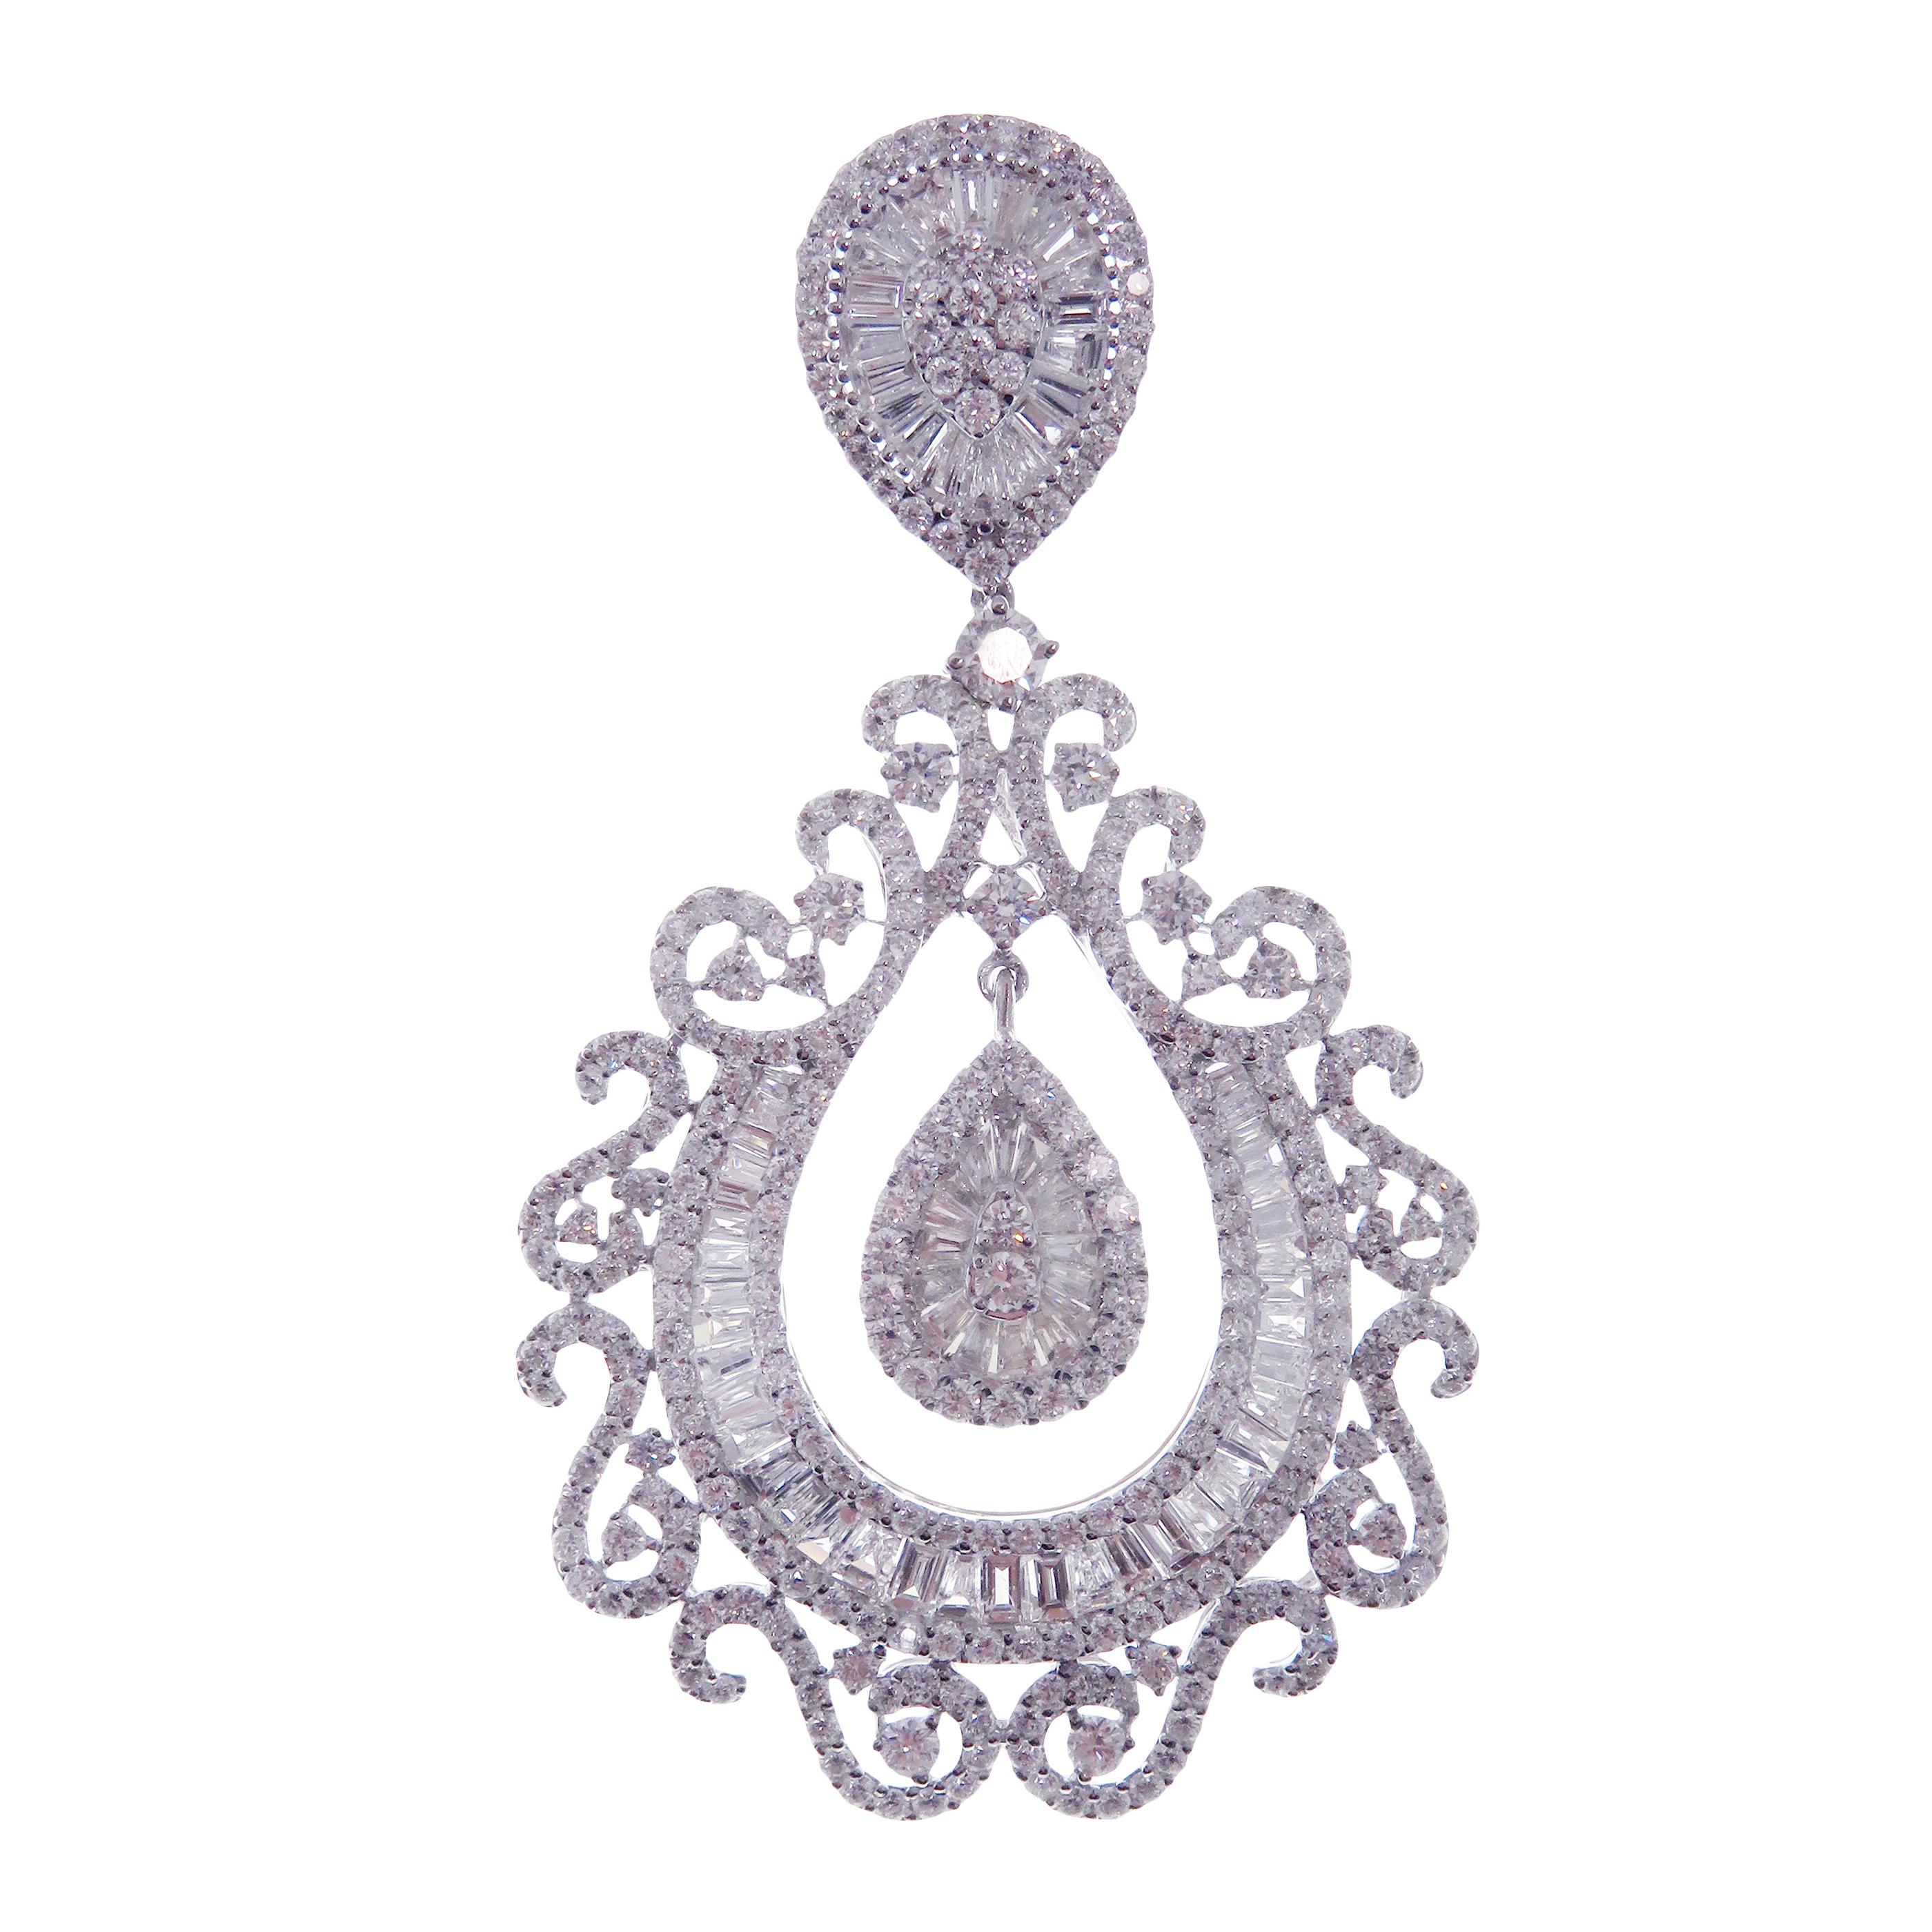 These pear swirl chandelier earrings are crafted in 18-karat white gold, weighing approximately 13.31 total carats of SI-V Quality white diamond. French clip backing. 

Our Ballroom Chandelier Collection feature earrings for those with bold/classy